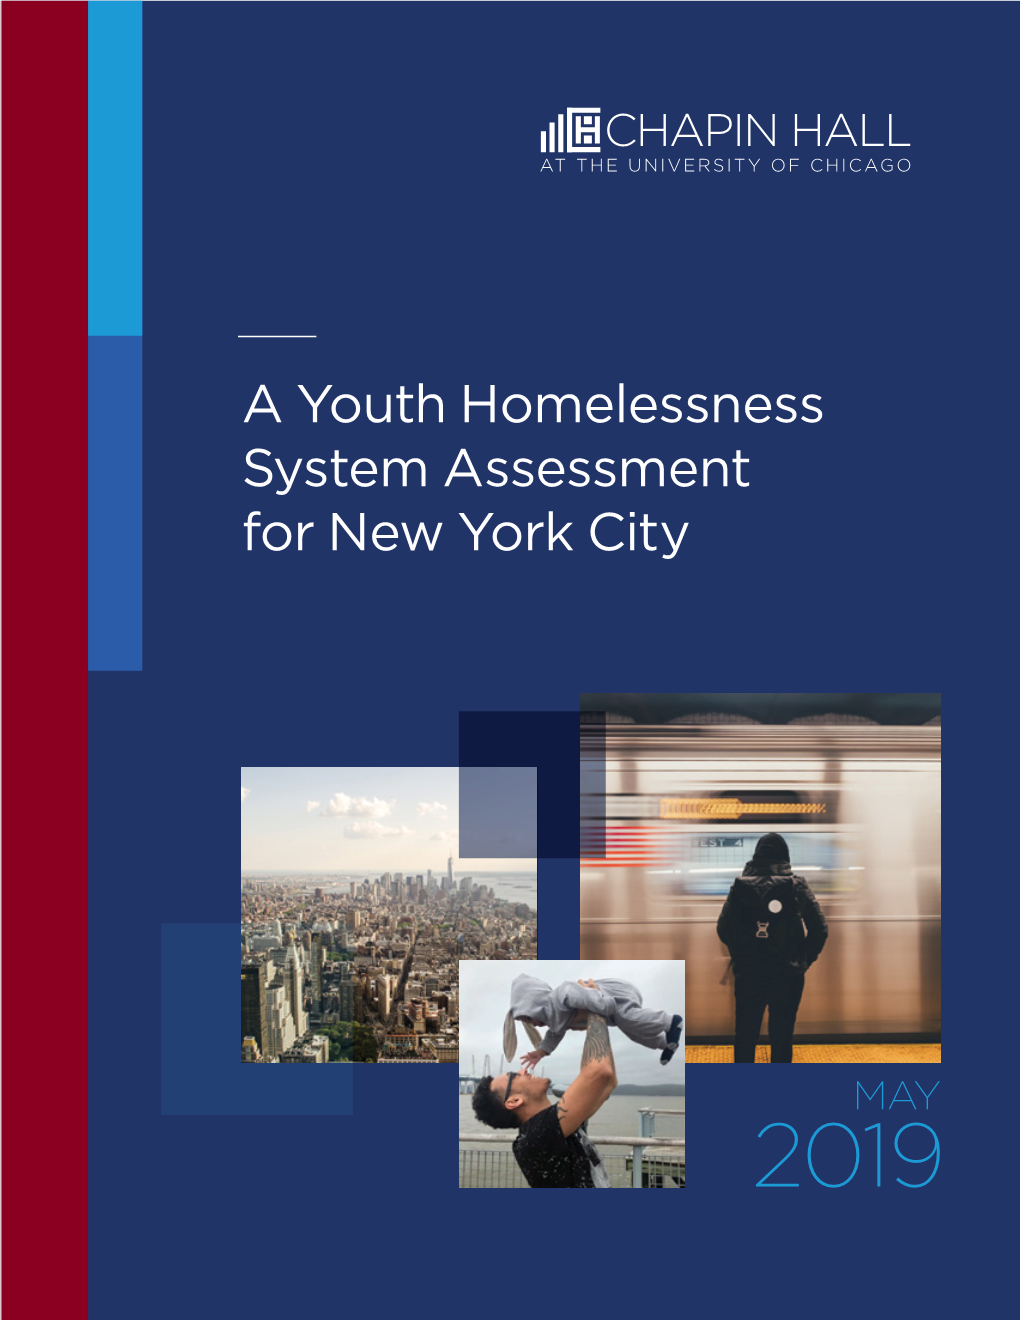 A Youth Homelessness System Assessment for New York City